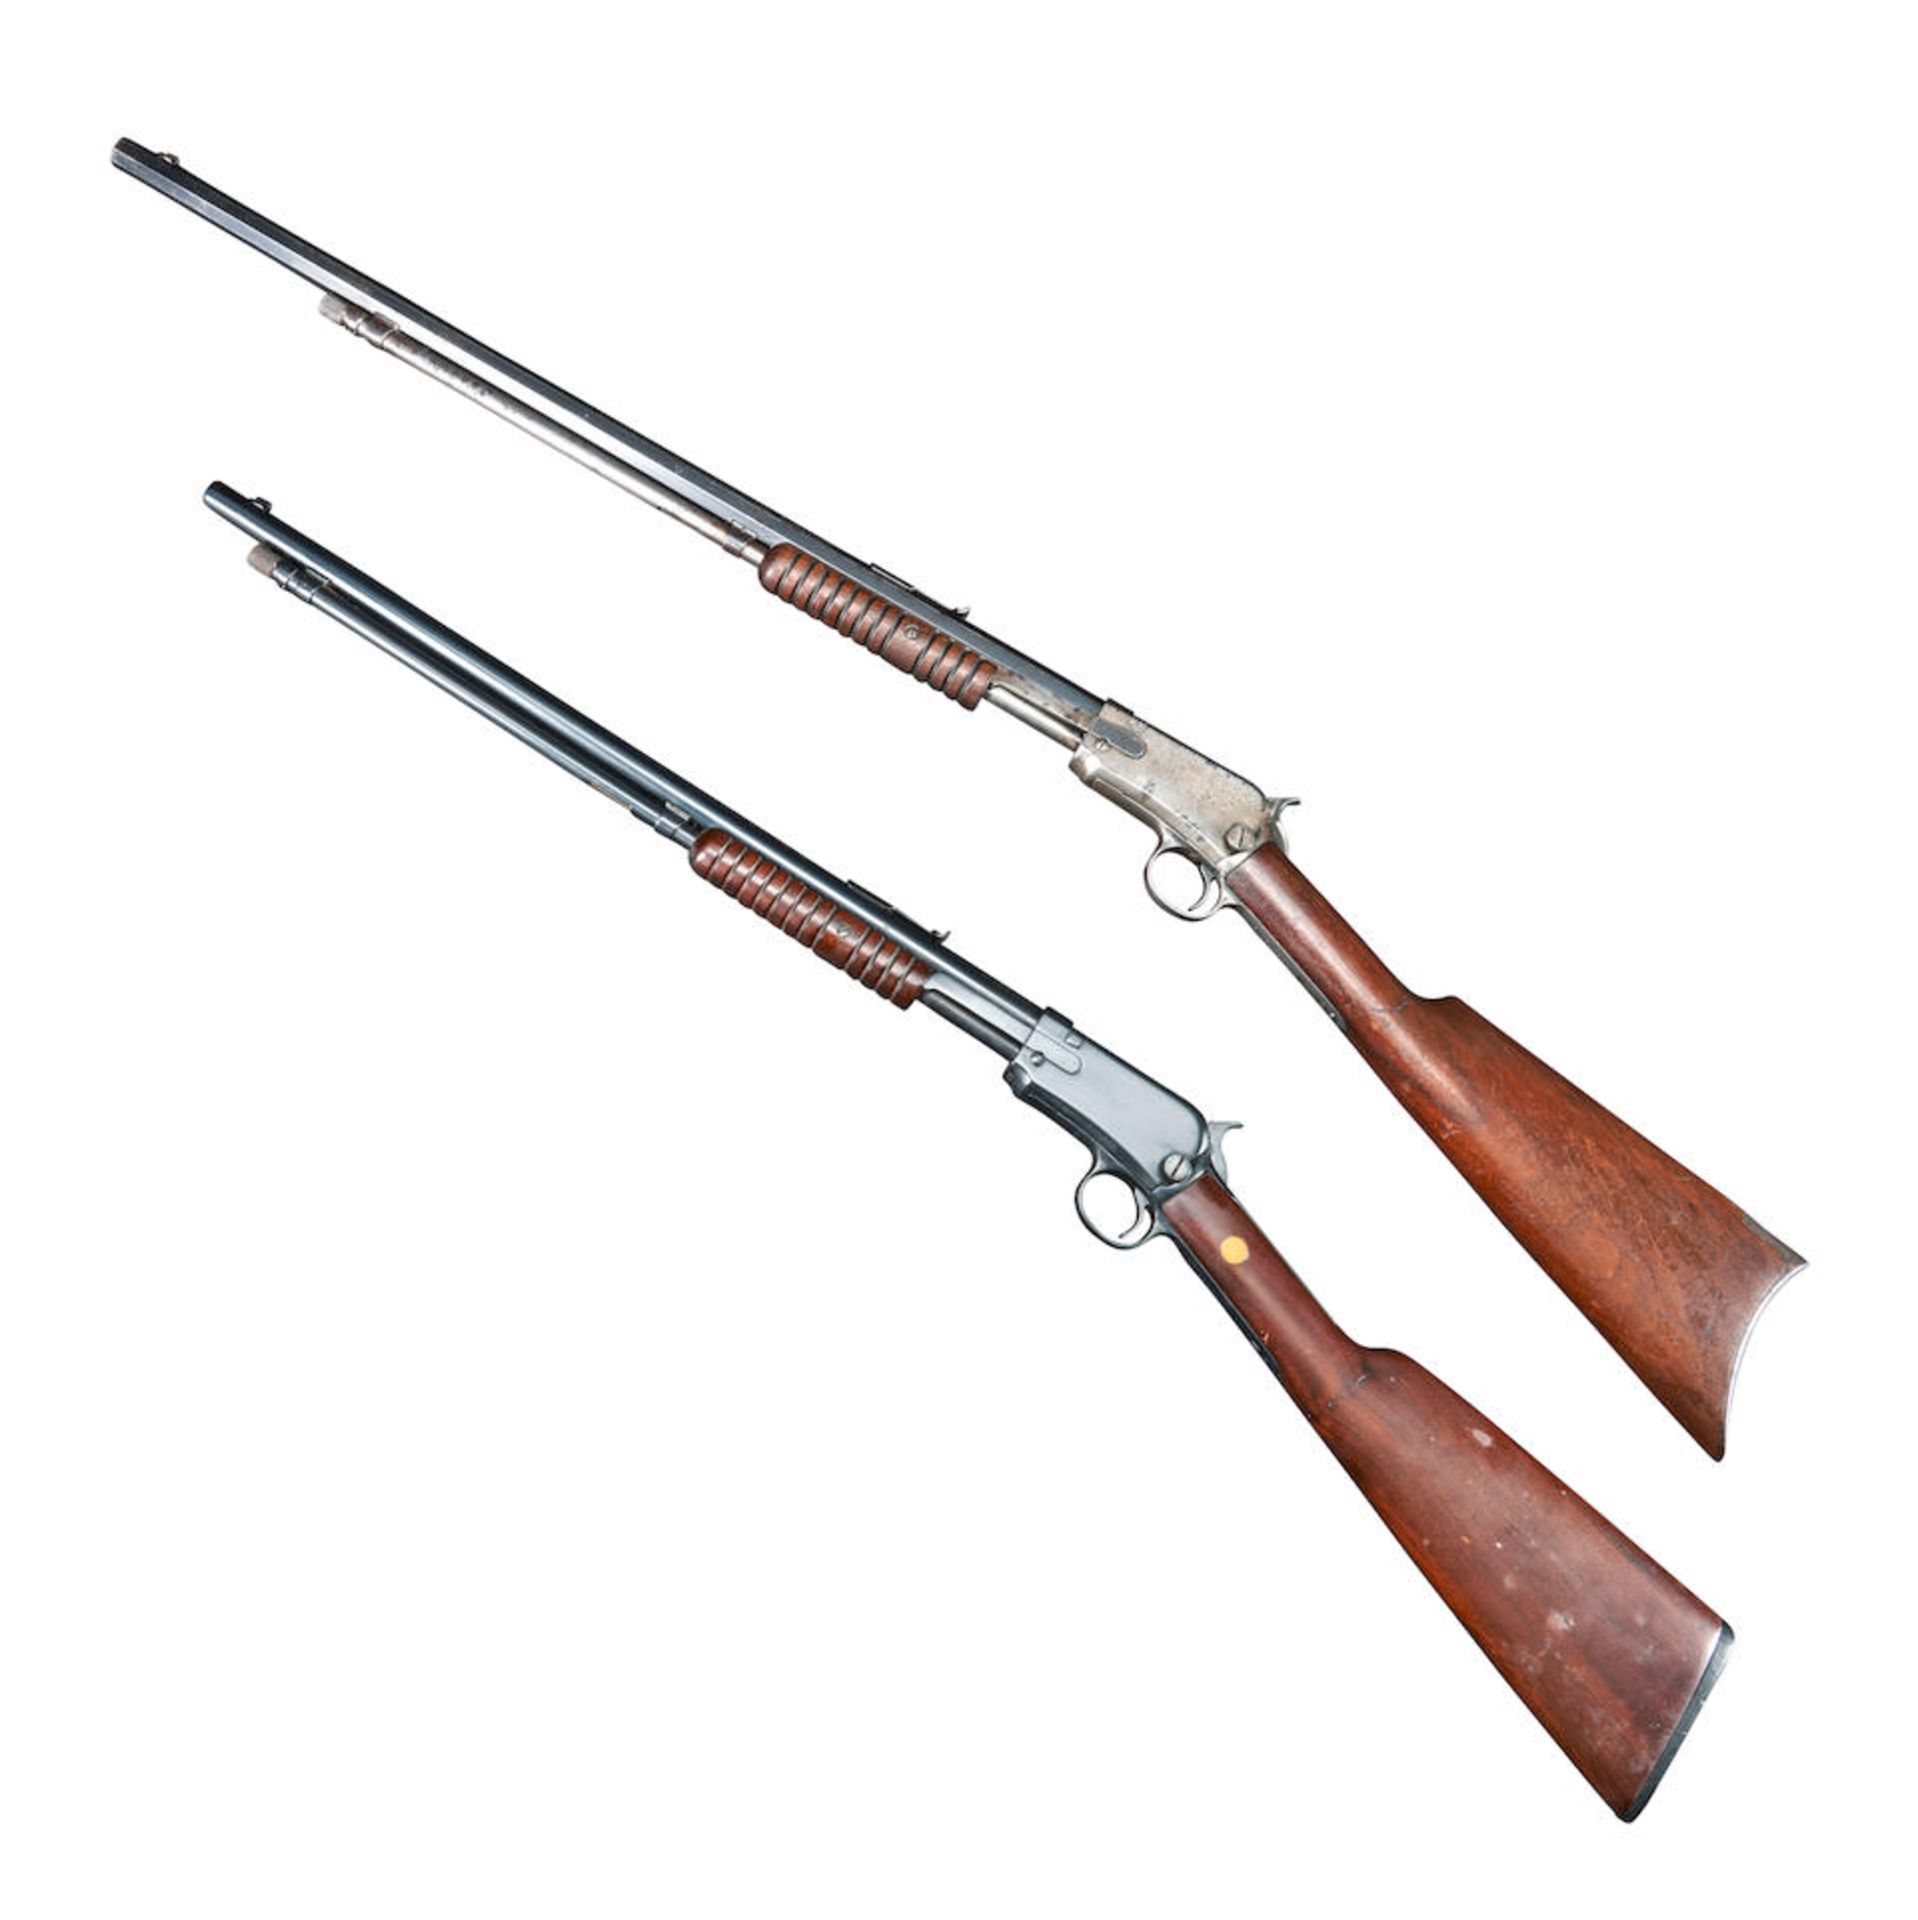 Two Winchester .22 Caliber Pump Action Rifles, Curio or Relic firearm - Image 2 of 2